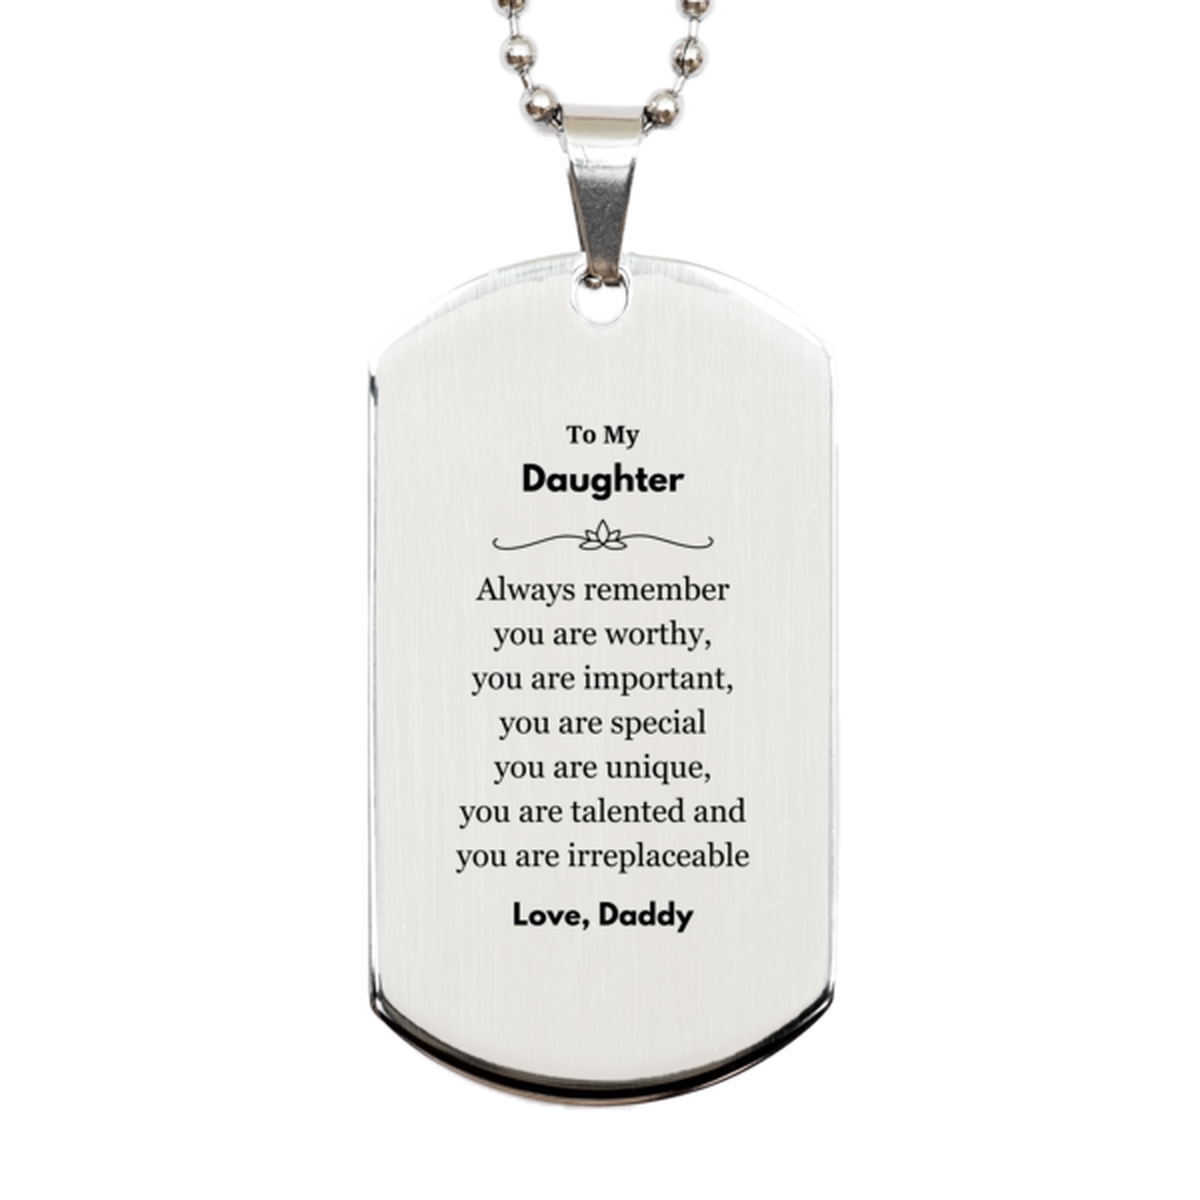 Daughter Birthday Gifts from Daddy, Inspirational Silver Dog Tag for Daughter Christmas Graduation Gifts for Daughter Always remember you are worthy, you are important. Love, Daddy